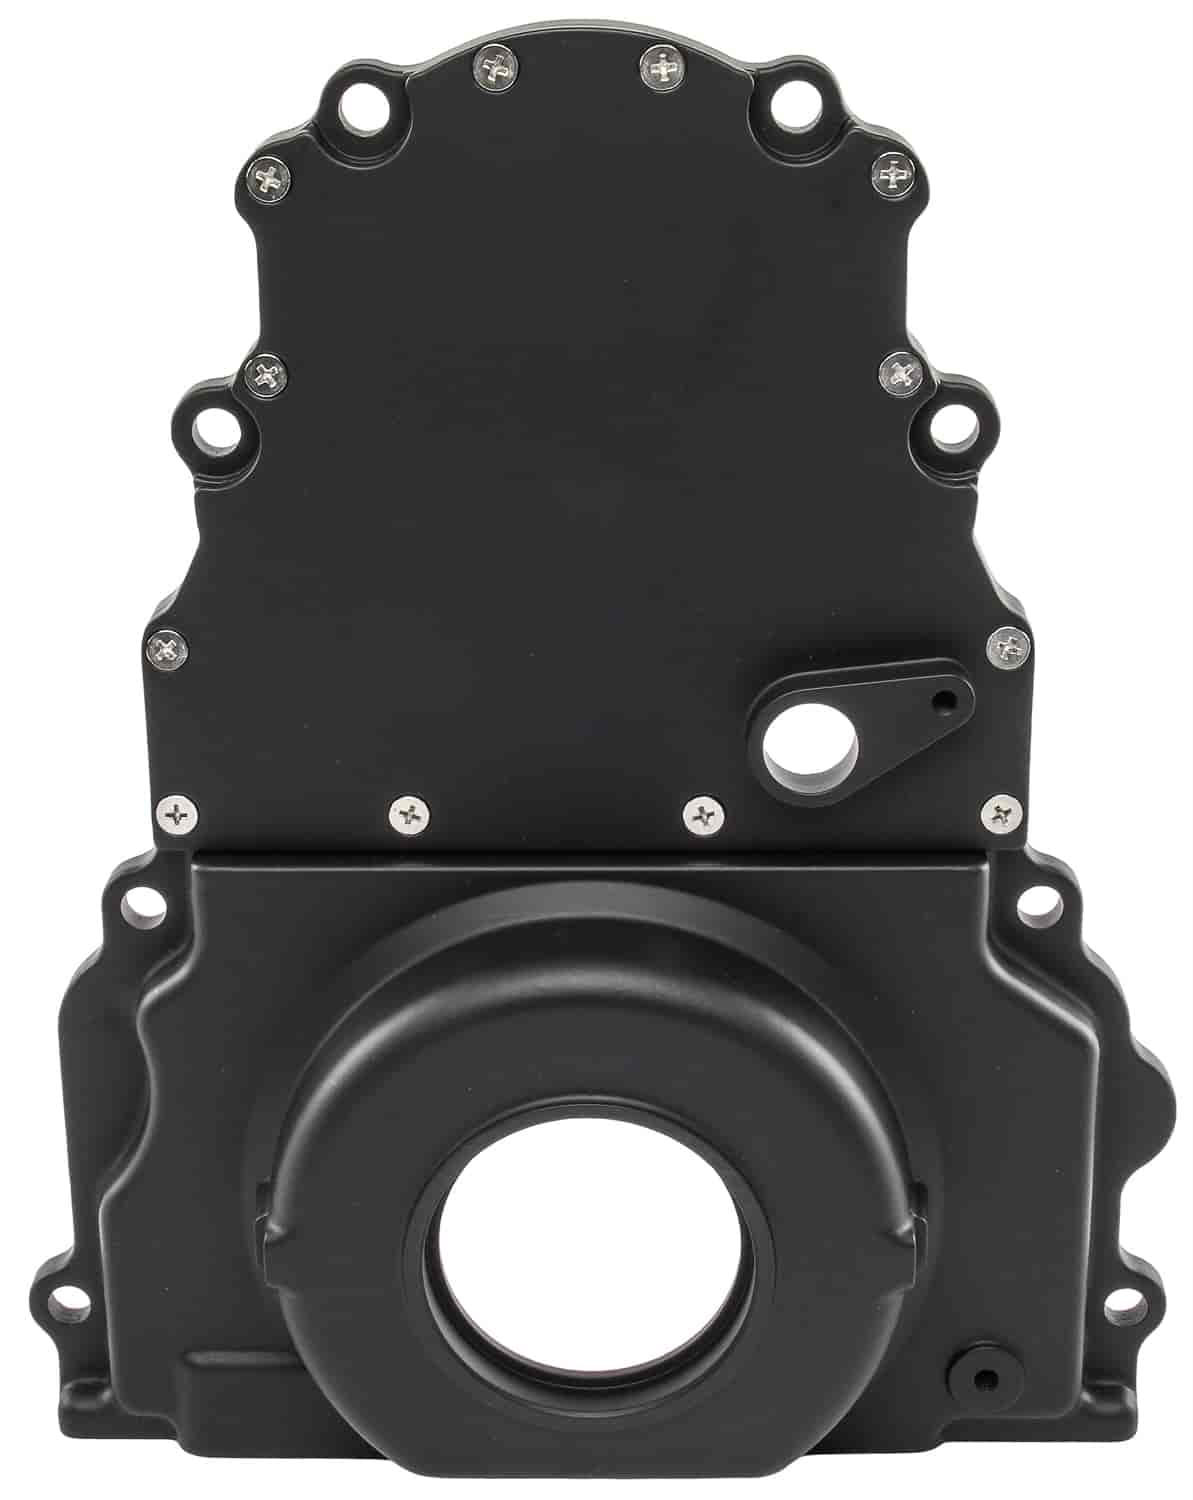 Timing Cover for GM LS Engines up to Gen IV with Front Mounted Cam Sensors [Black]